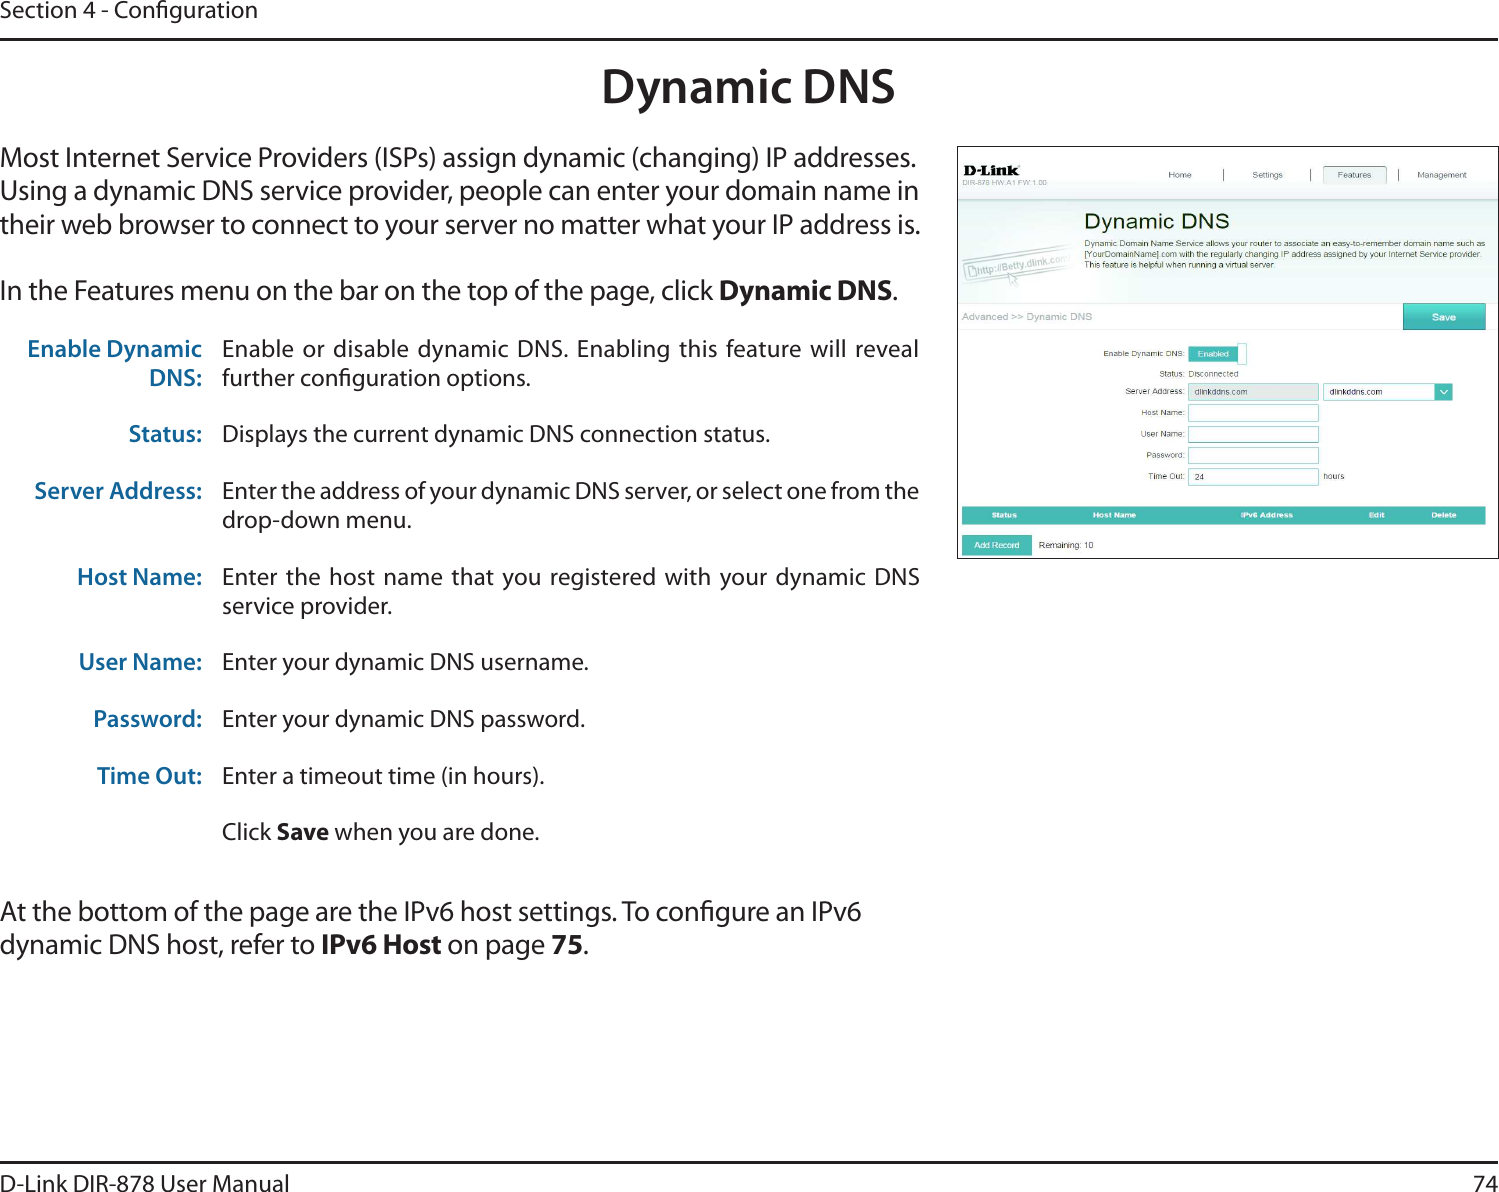 74D-Link DIR-878 User ManualSection 4 - CongurationDynamic DNSMost Internet Service Providers (ISPs) assign dynamic (changing) IP addresses. Using a dynamic DNS service provider, people can enter your domain name in their web browser to connect to your server no matter what your IP address is.In the Features menu on the bar on the top of the page, click Dynamic DNS.At the bottom of the page are the IPv6 host settings. To congure an IPv6 dynamic DNS host, refer to IPv6 Host on page 75.Enable Dynamic DNS:Enable or disable dynamic DNS. Enabling this  feature will reveal further conguration options.Status: Displays the current dynamic DNS connection status.Server Address: Enter the address of your dynamic DNS server, or select one from the drop-down menu.Host Name: Enter the host name that  you registered with your dynamic DNS service provider.User Name: Enter your dynamic DNS username.Password: Enter your dynamic DNS password.Time Out: Enter a timeout time (in hours).Click Save when you are done.